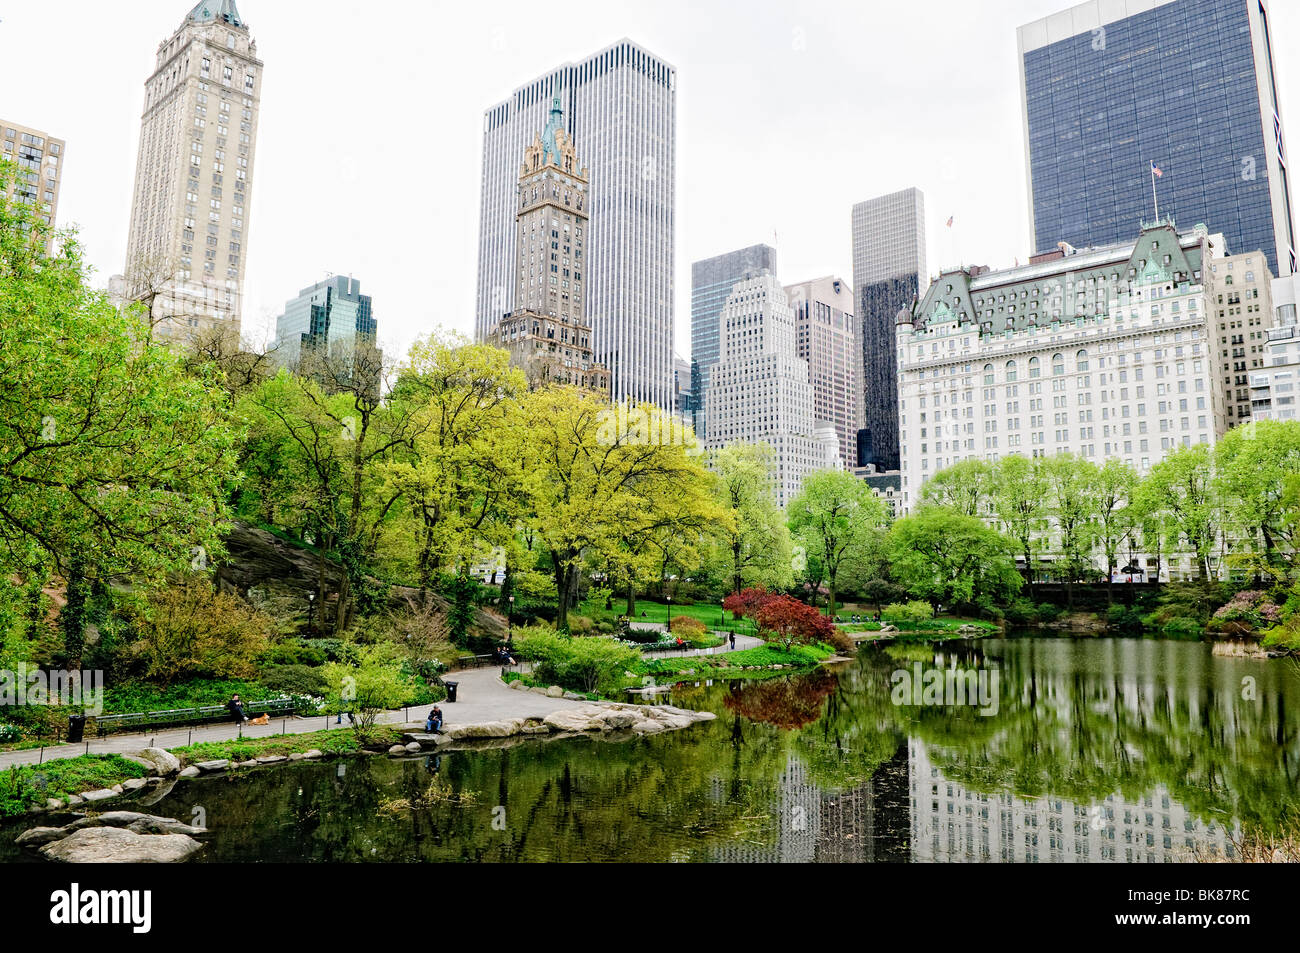 NEW YORK, NY - The Pond in New York's Central Park in the spring, with ...